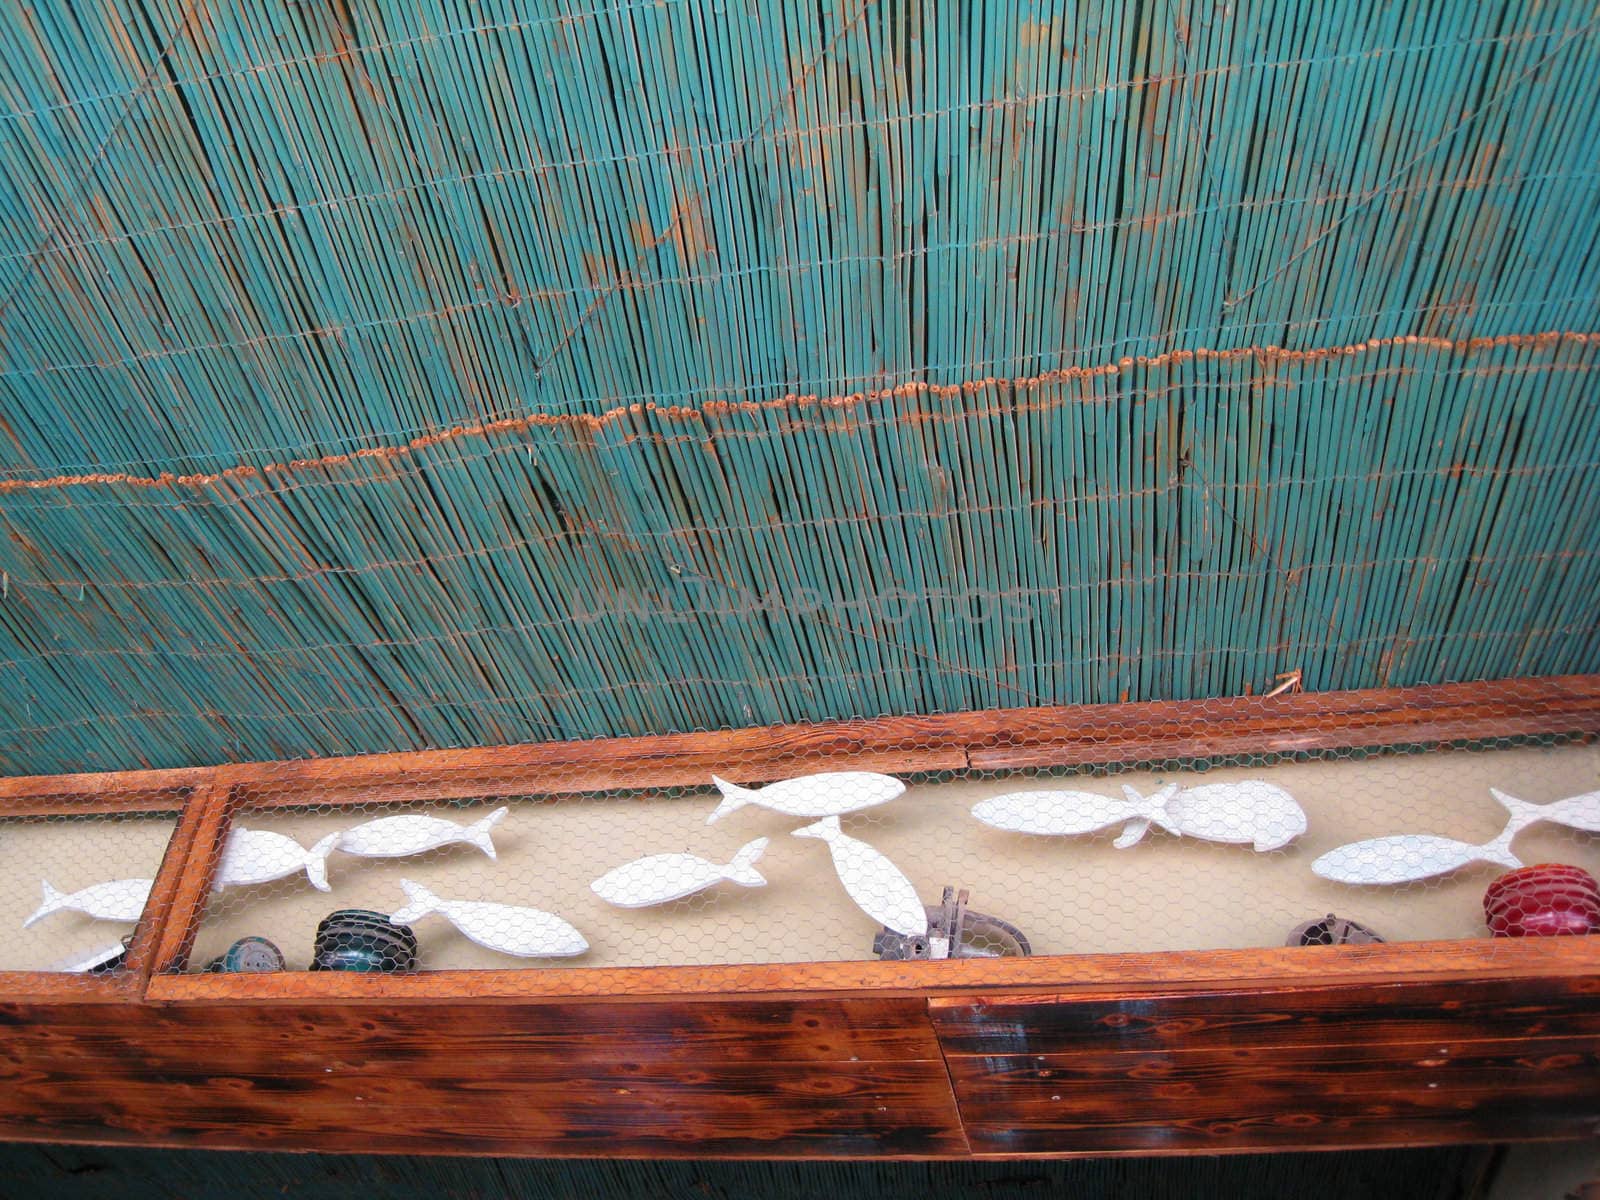 Detail of the ceiling of a fishing establishment